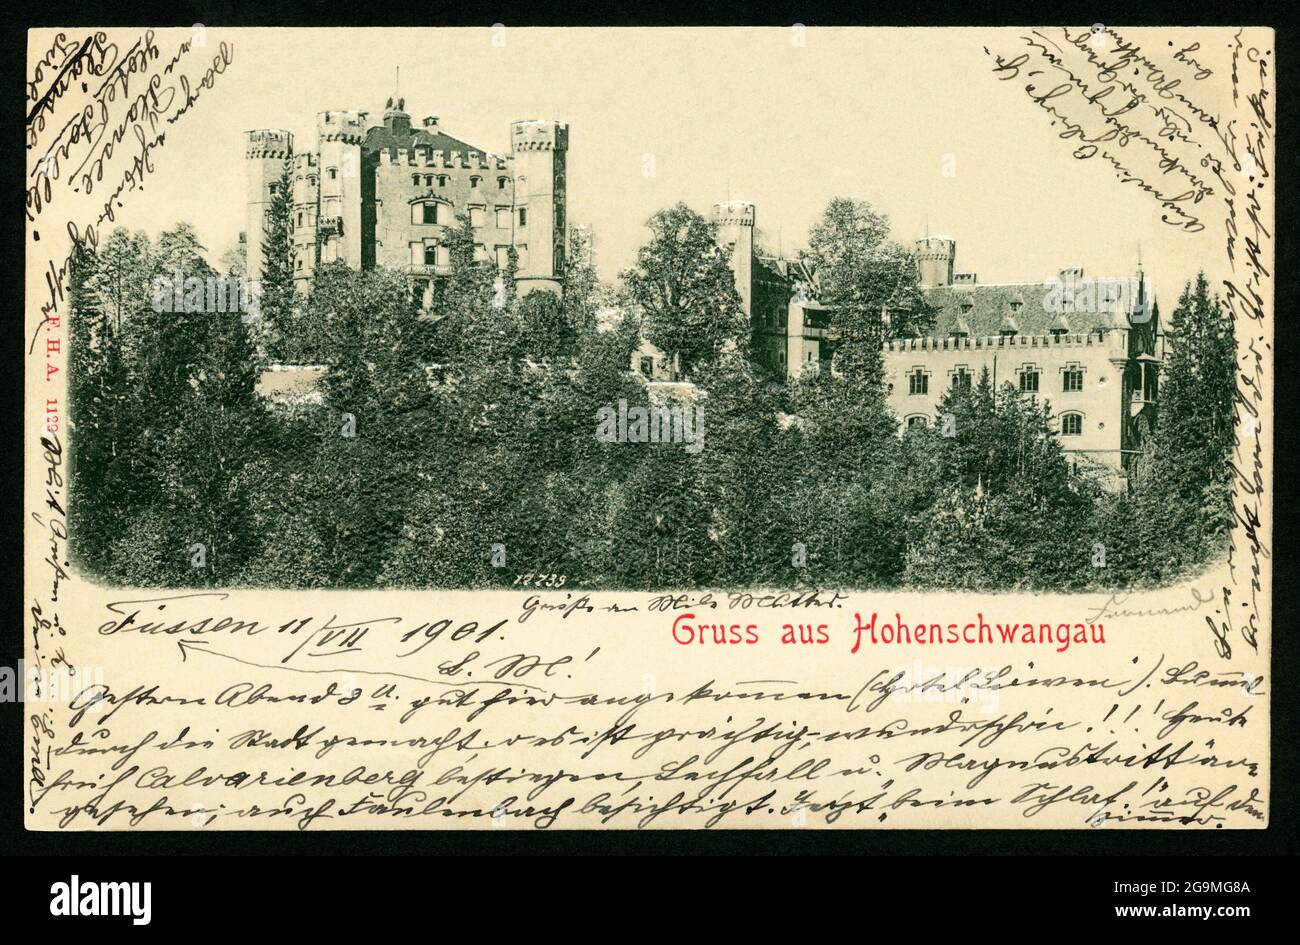 geography / travel, Germany, Bavaria, Hohenschwangau Castle, relief postcard, sent 11. 07. 1901, ADDITIONAL-RIGHTS-CLEARANCE-INFO-NOT-AVAILABLE Stock Photo